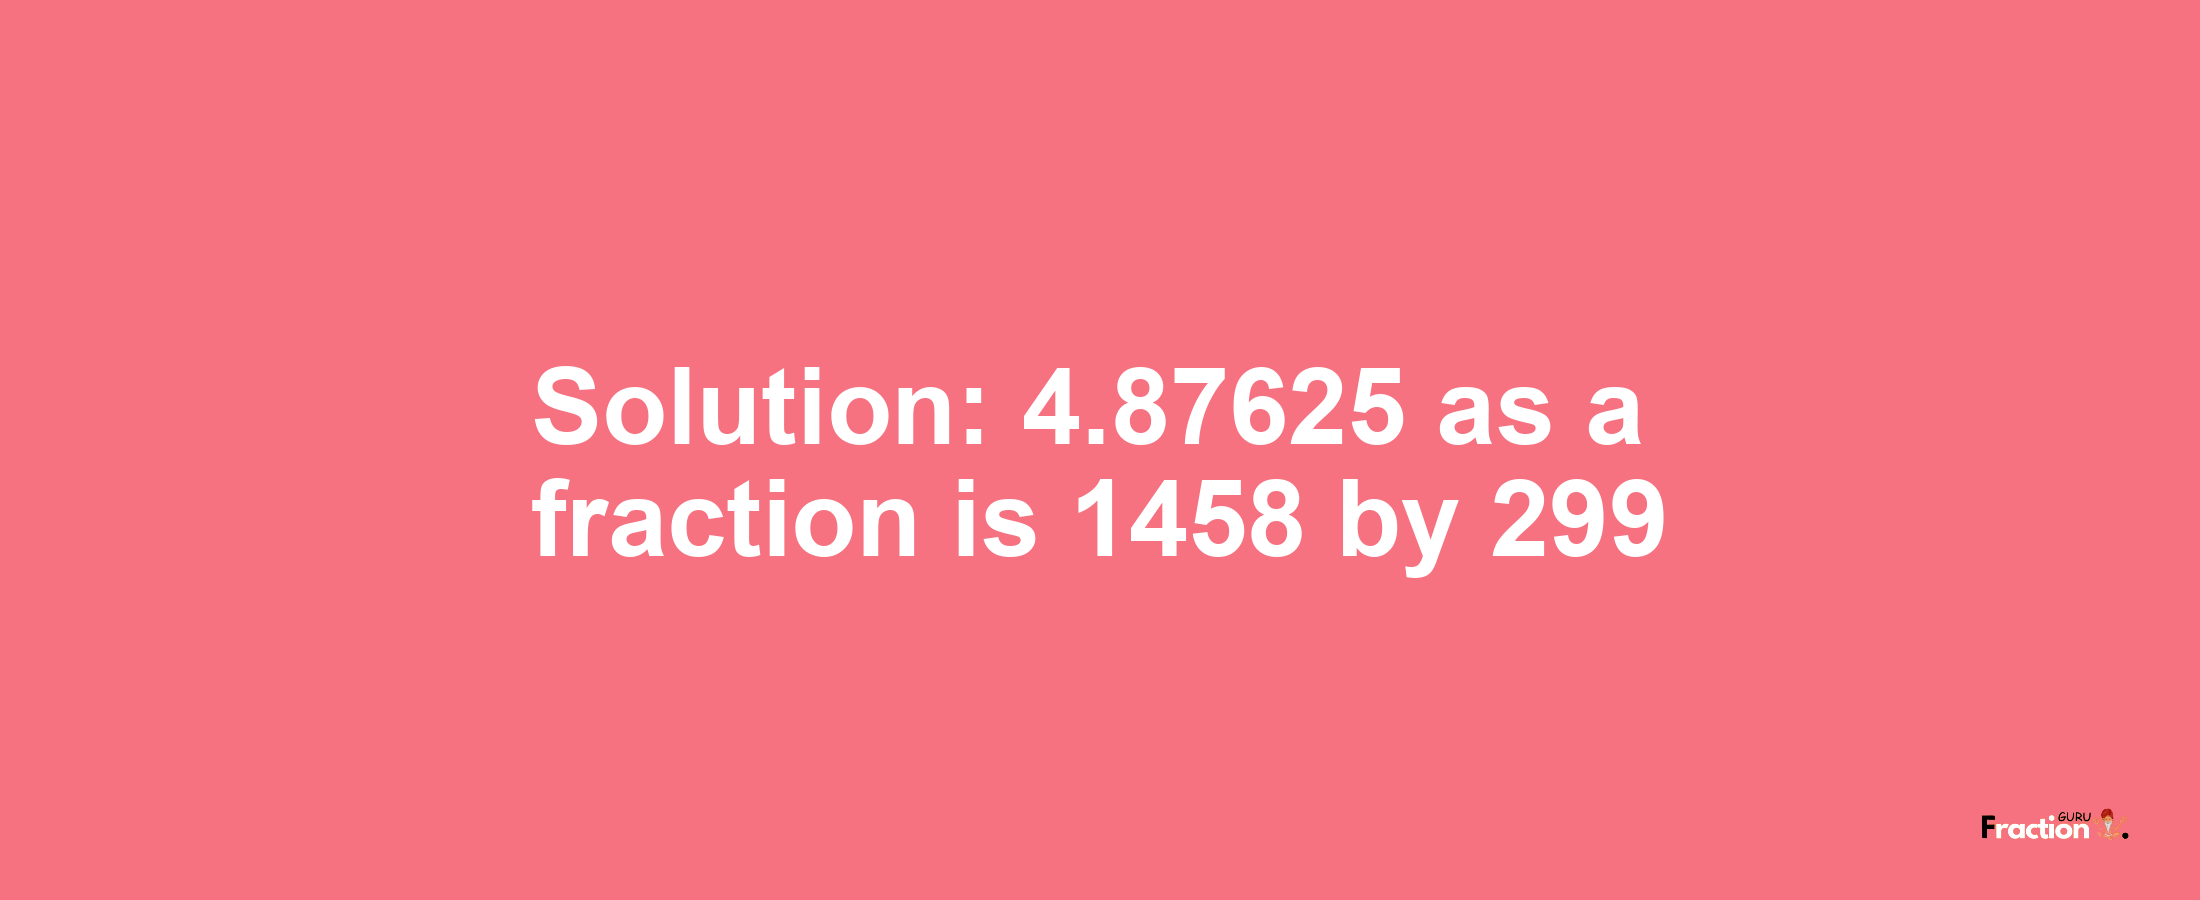 Solution:4.87625 as a fraction is 1458/299